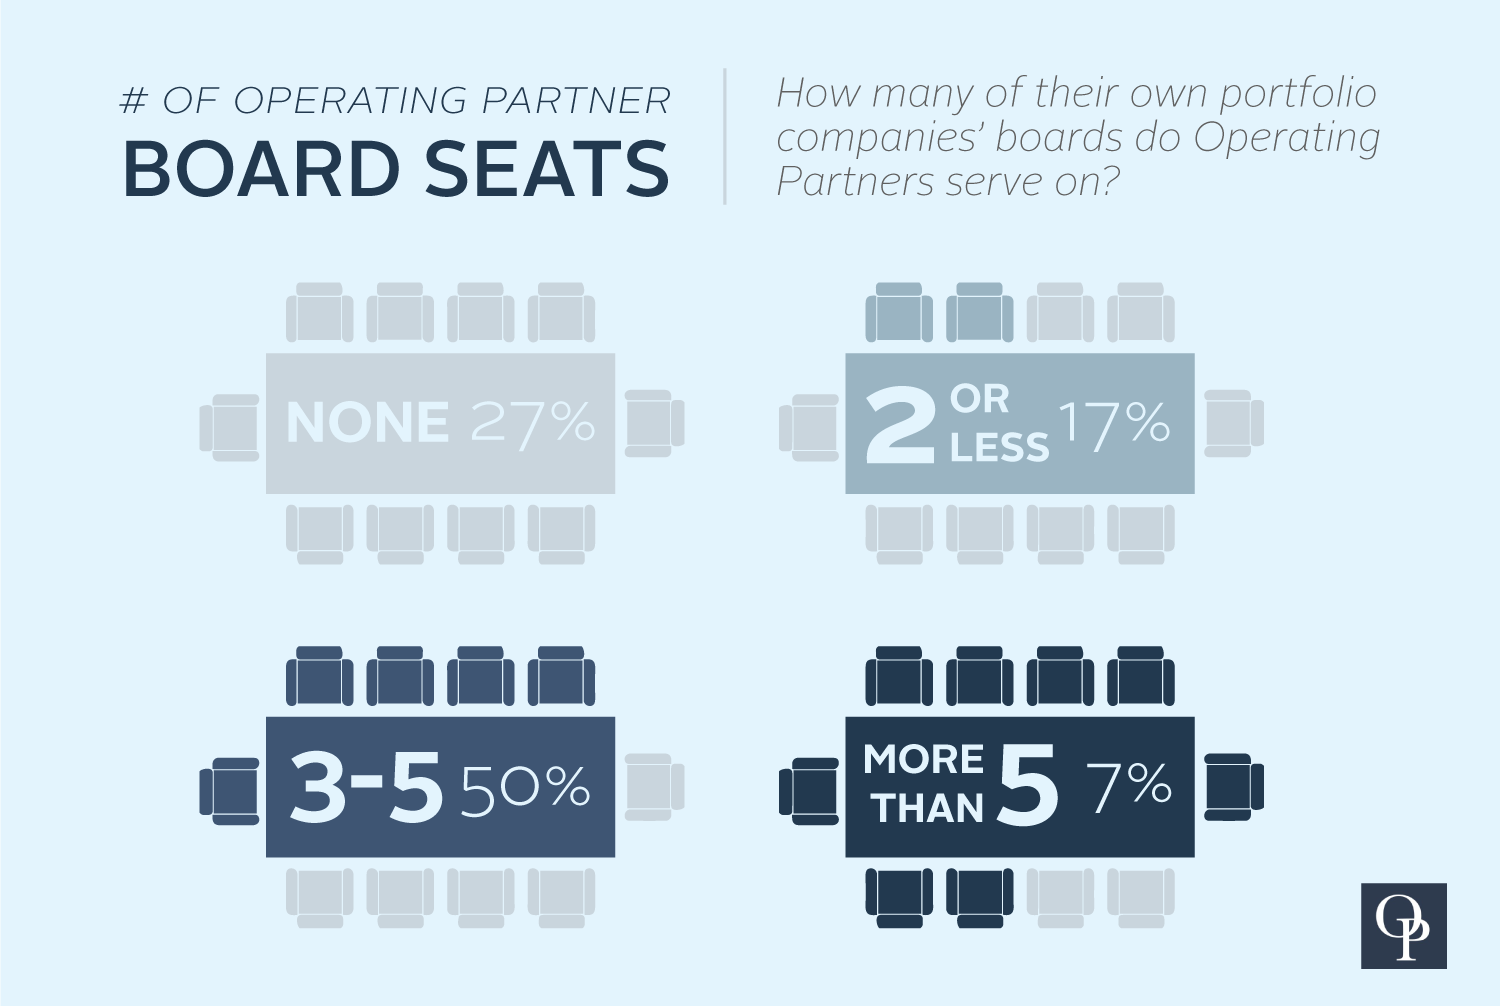 ARE OPERATING PARTNERS SITTING ON PORTFOLIO COMPANY BOARDS?